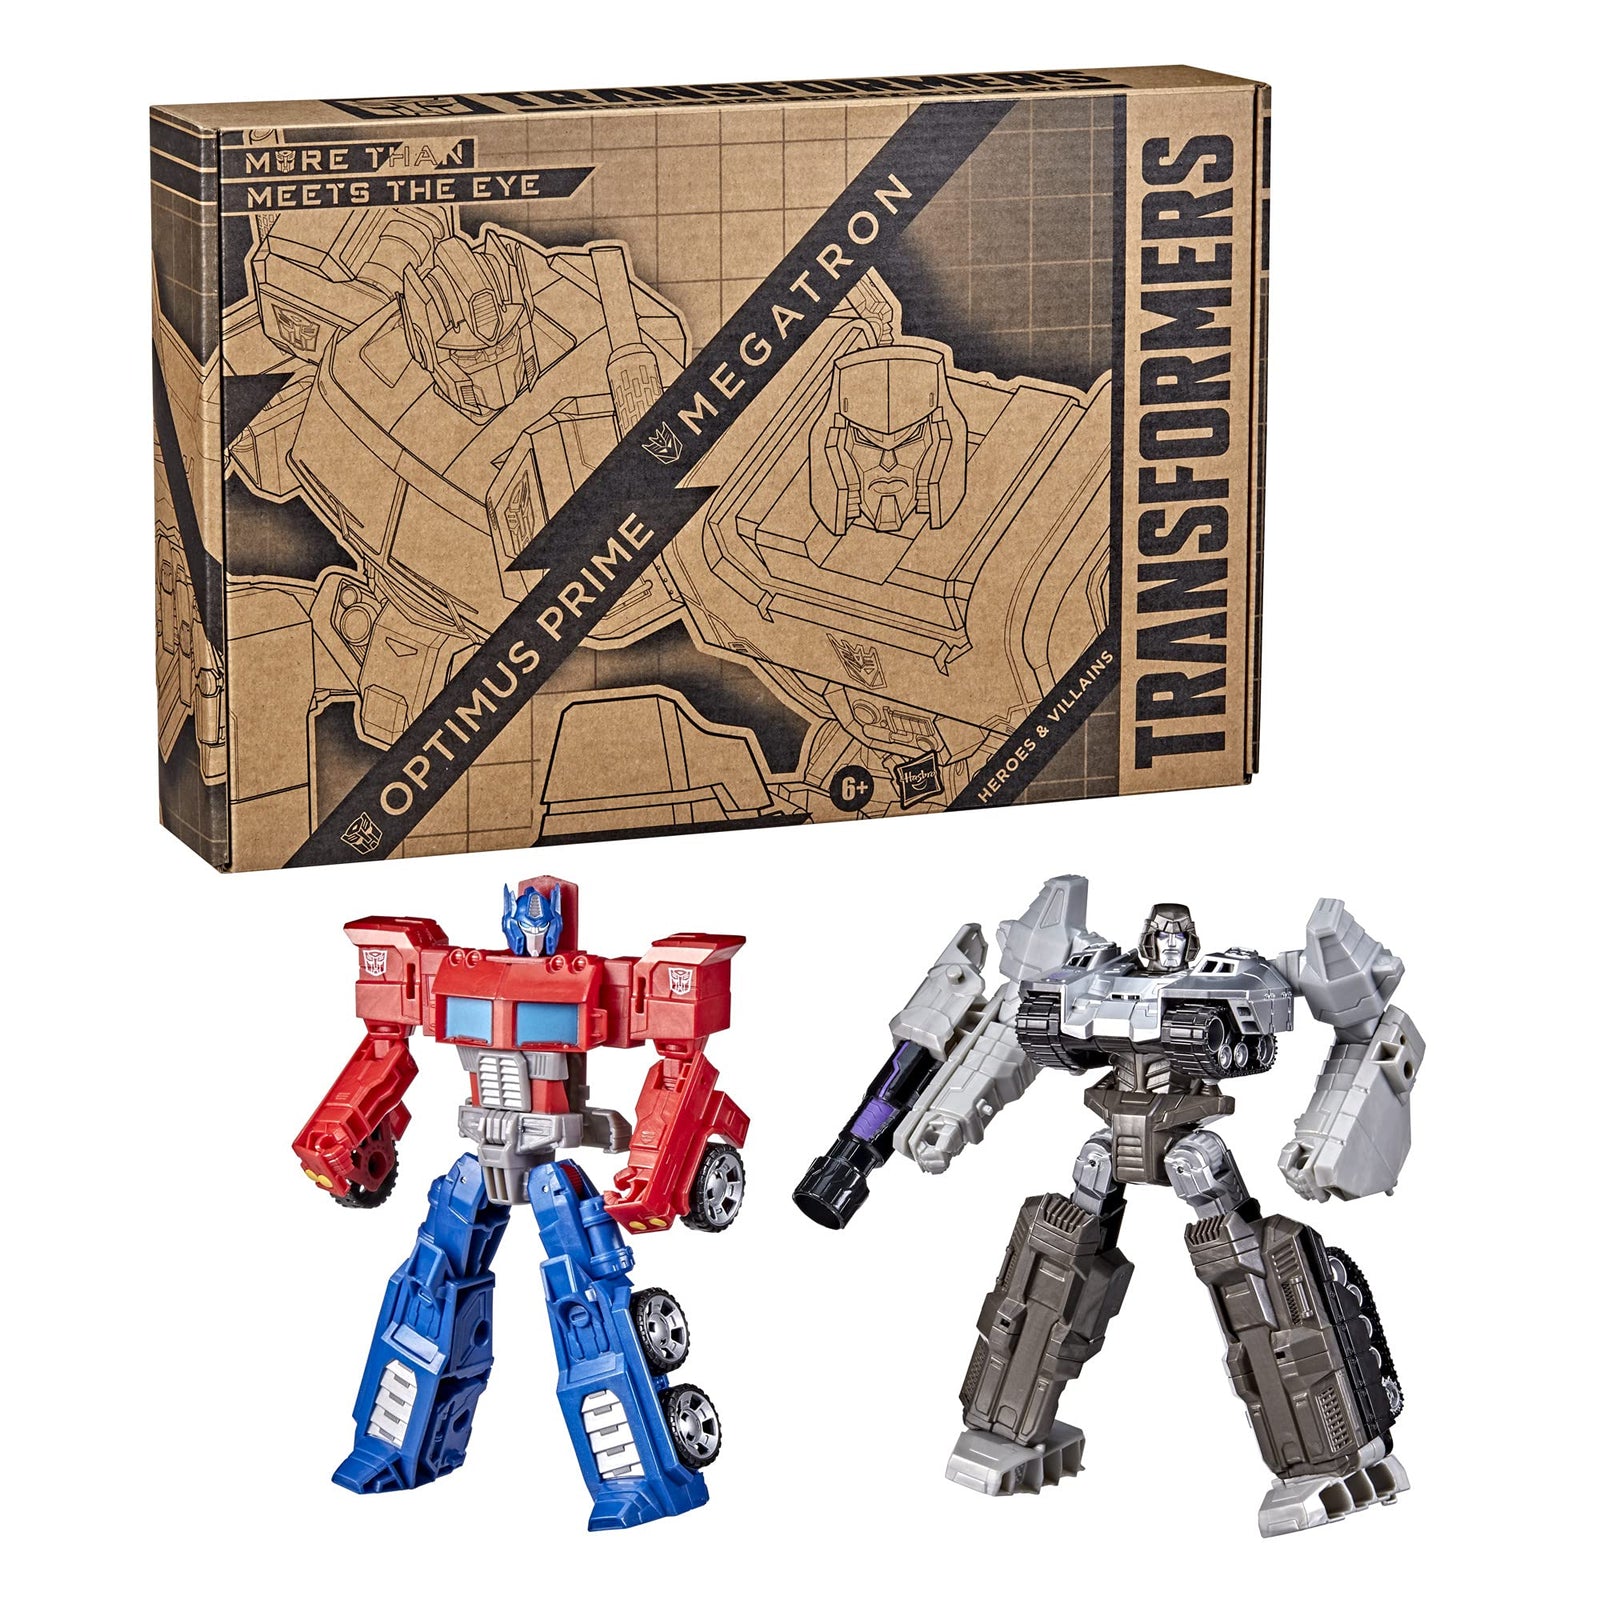 Transformers Toys Heroes and Villains Optimus Prime and Megatron 2-Pack Action Figures - for Kids Ages 6 and Up, 7-inch